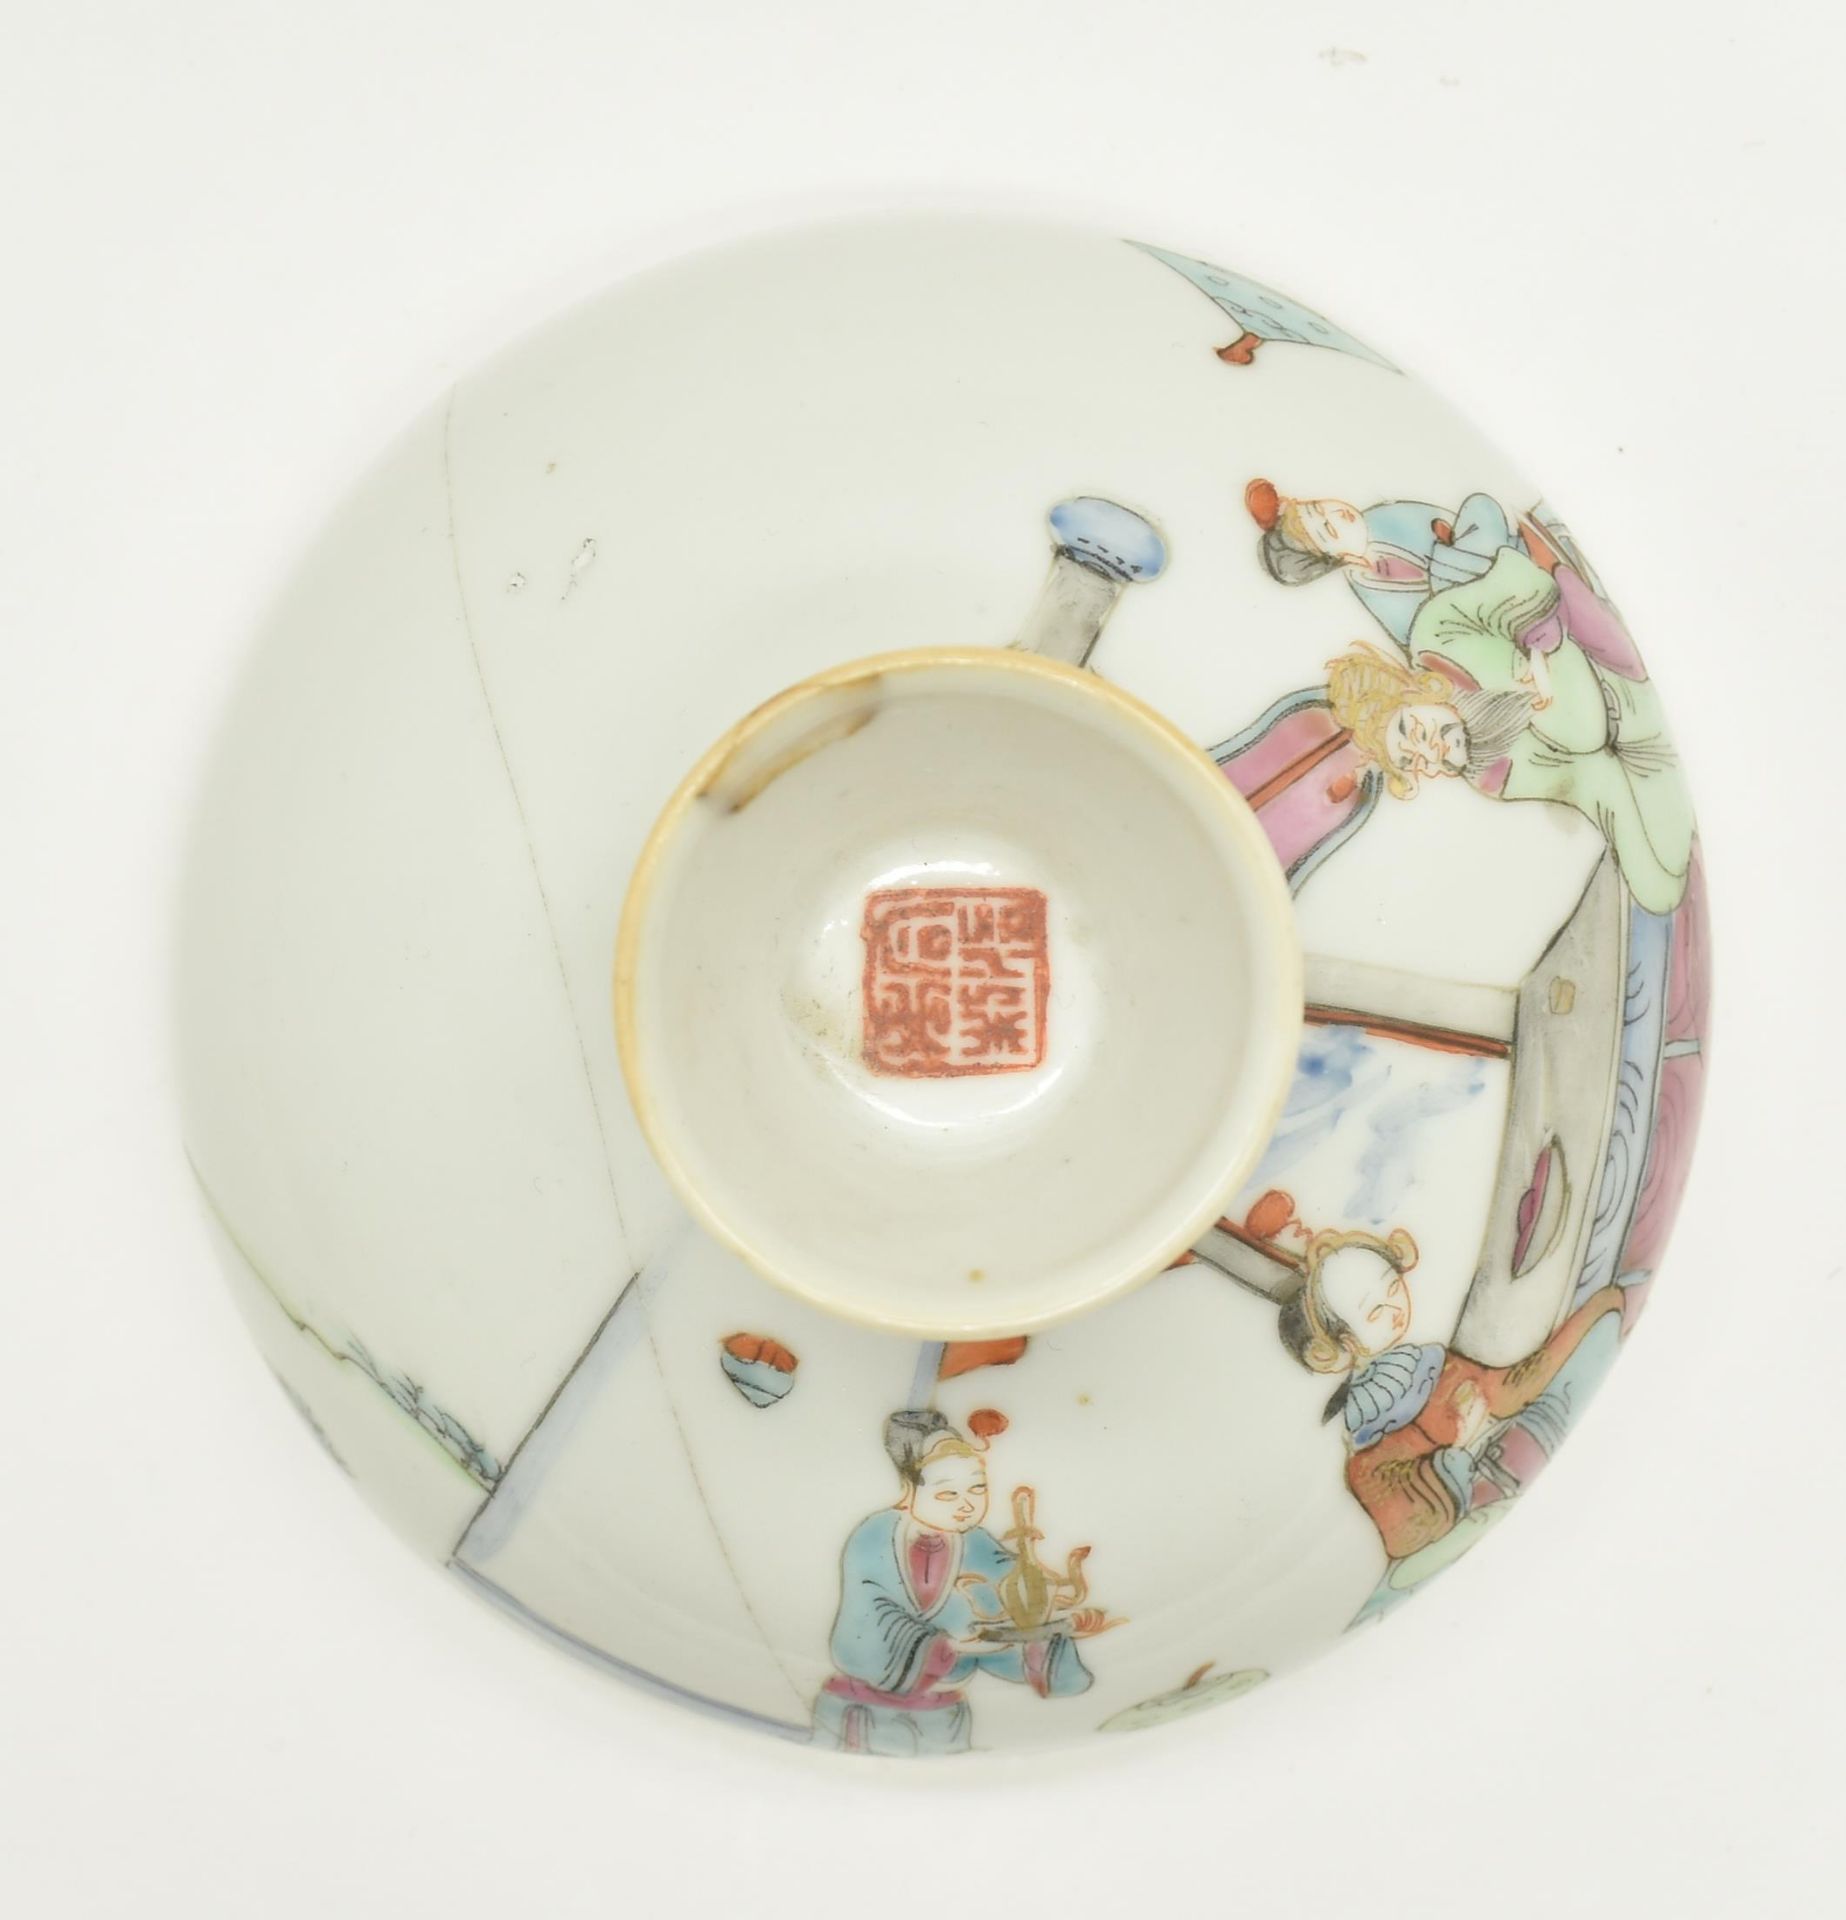 QING TONGZHI FAMILLE ROSE JAR WITH LID 清 同治粉彩盖罐 - Image 8 of 10